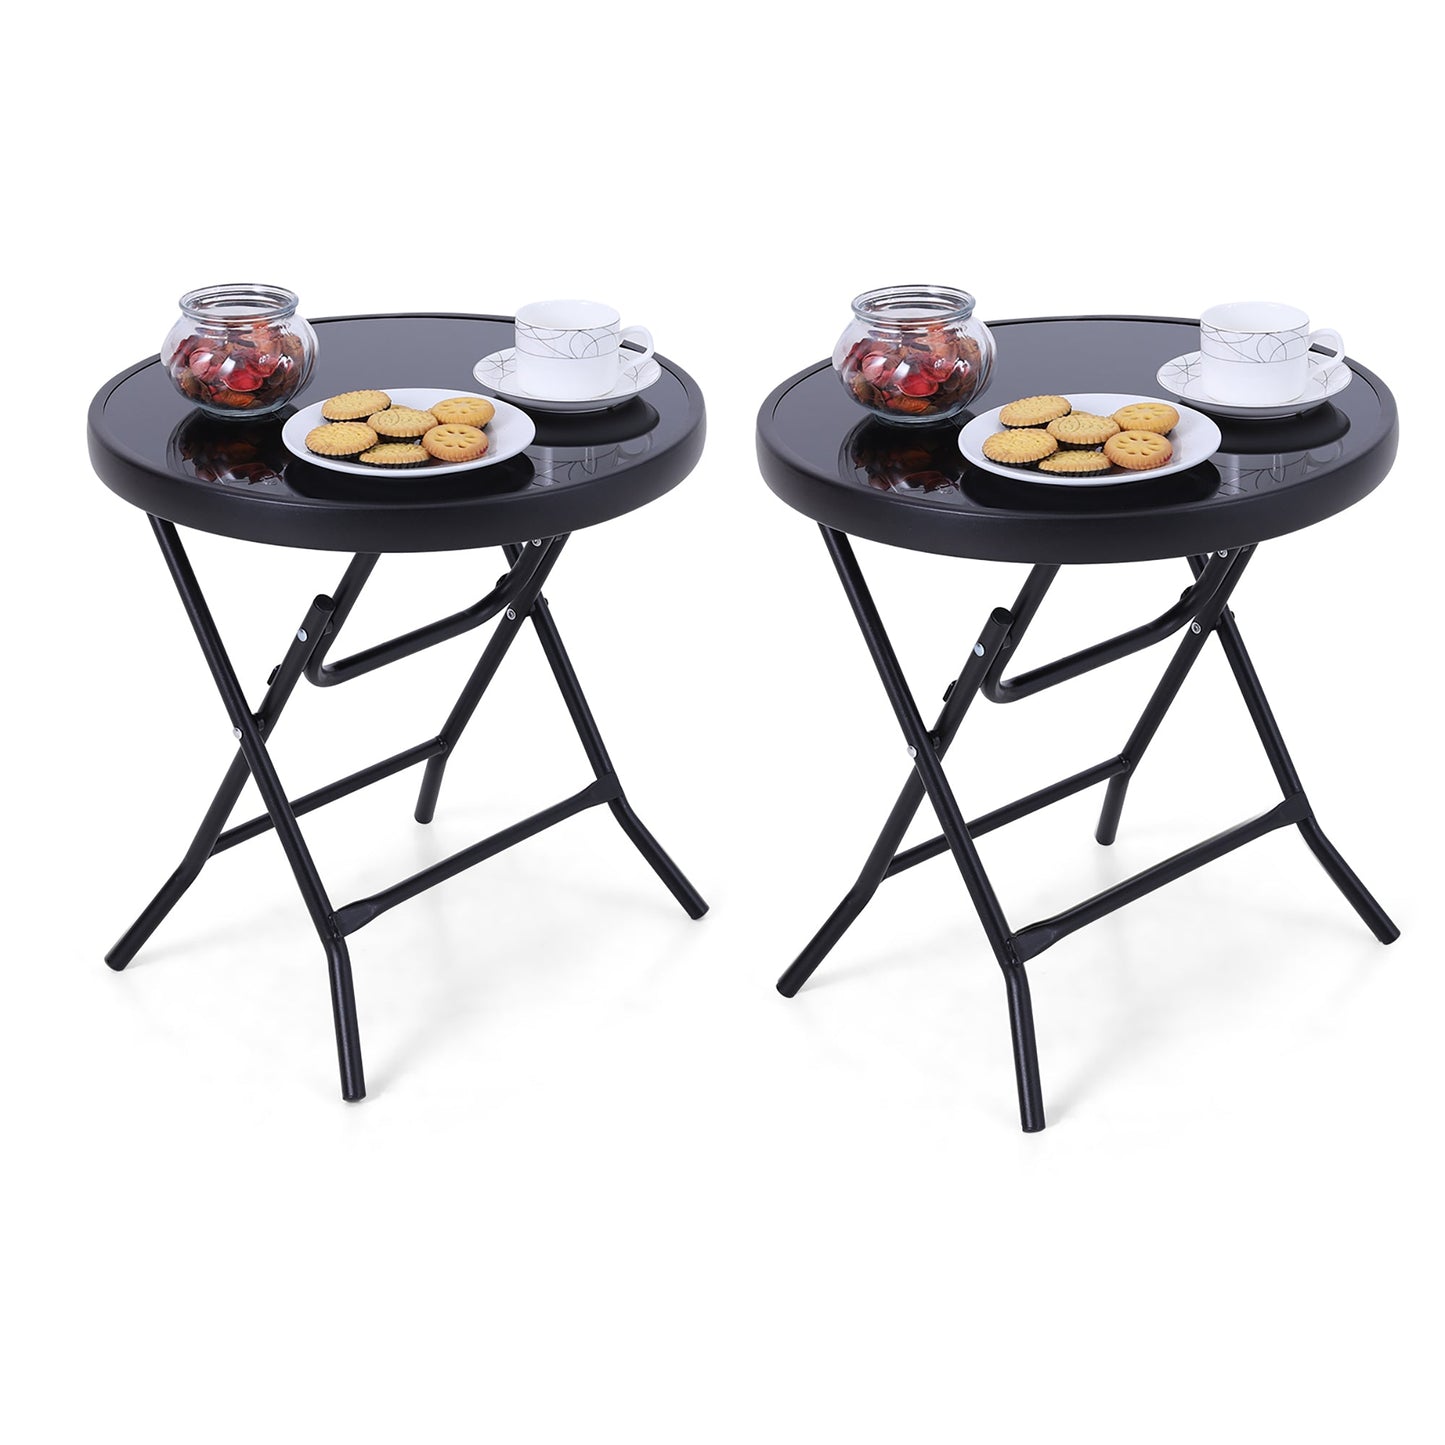 Sophia & William 2 Piece 18 inch Patio Round Folding Side Table Small Portable Bistro Coffee Table Tempered Glass Top Black